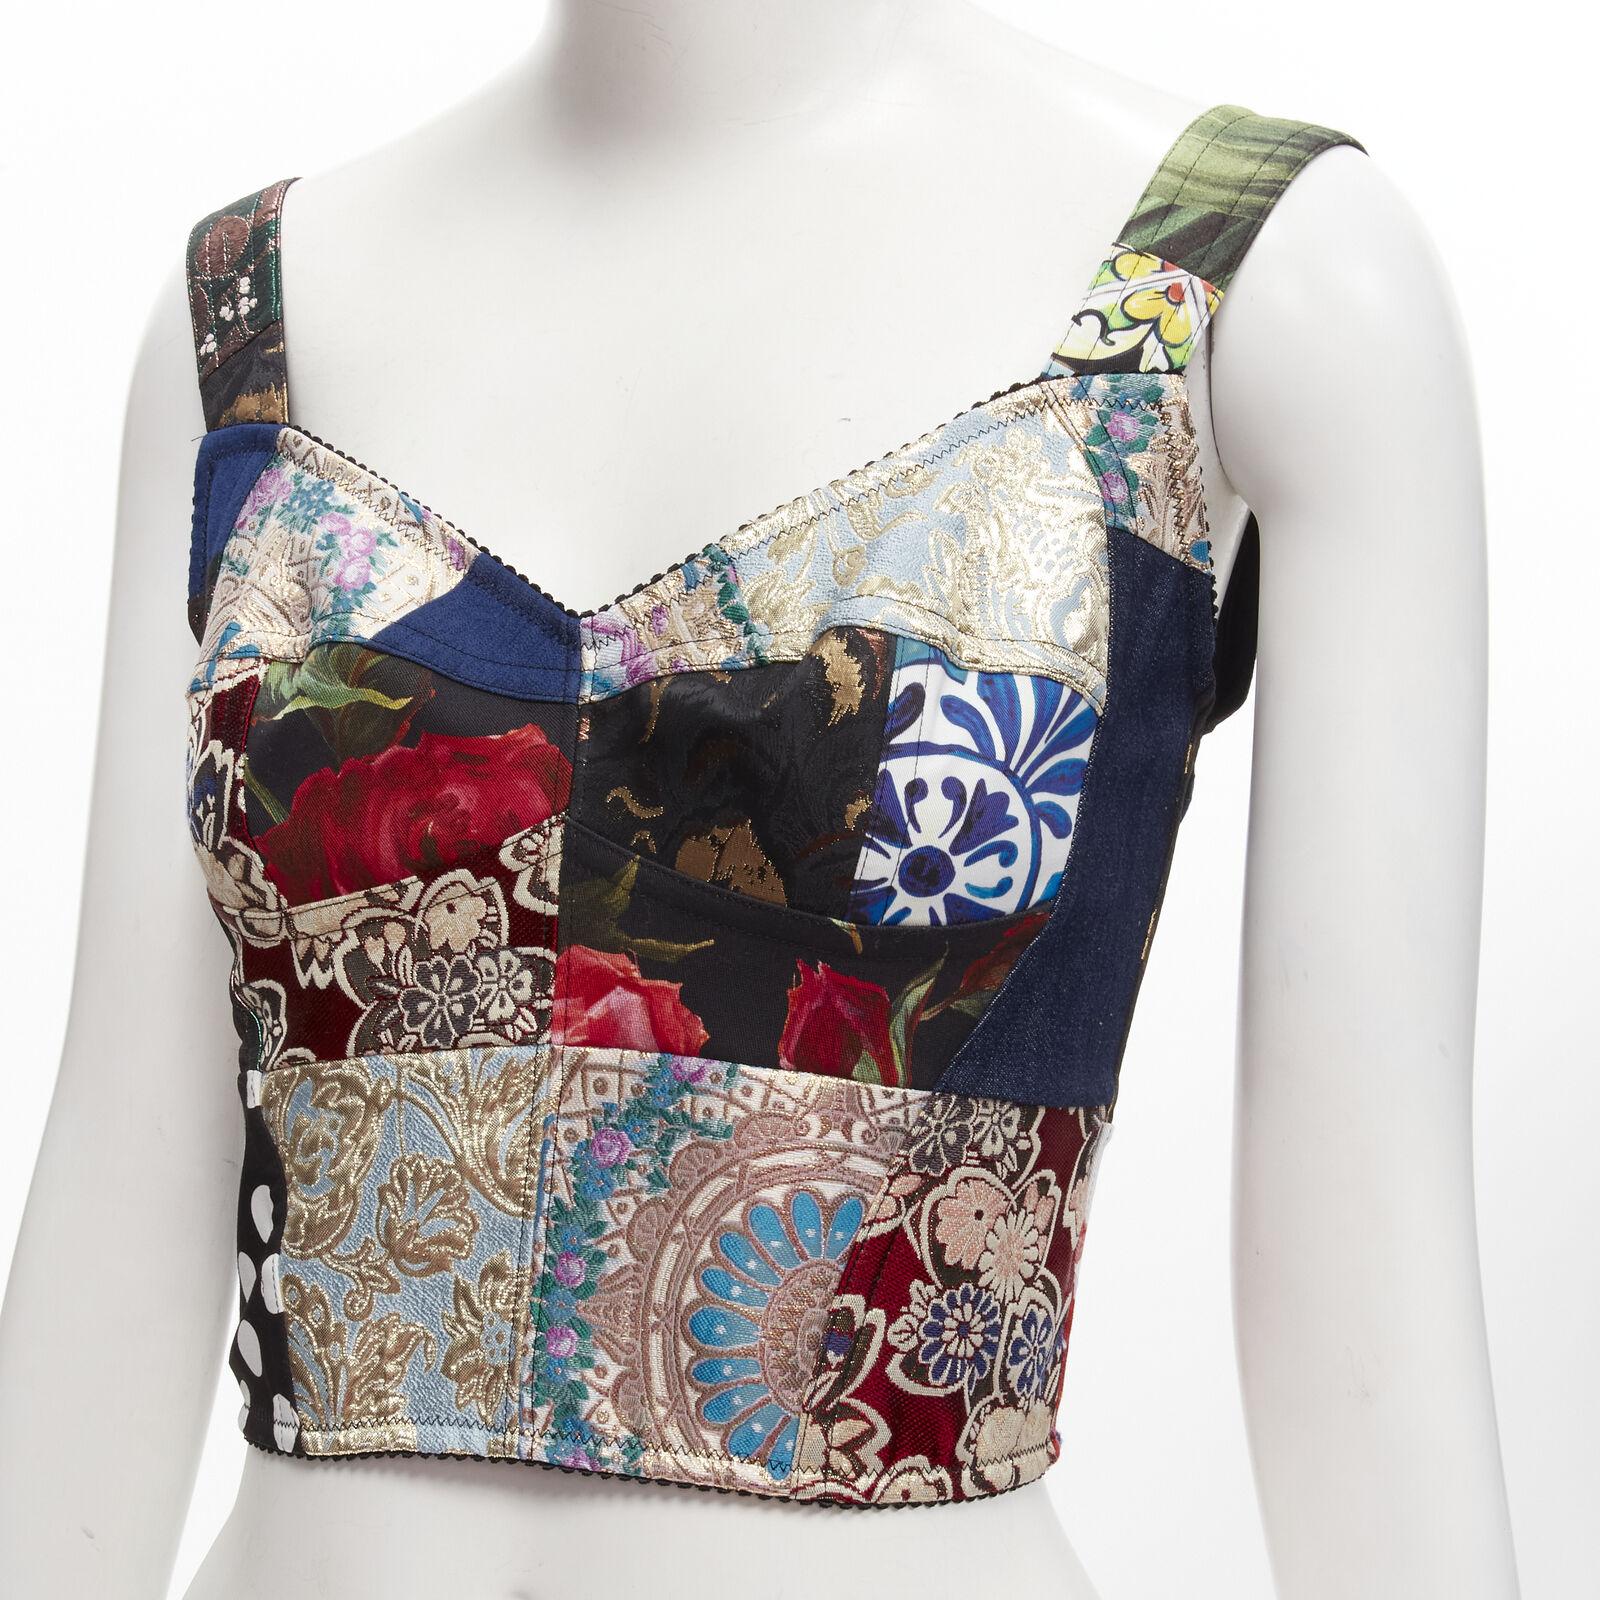 DOLCE GABBANA 2021 Sicilian Patchwork metallic jacquard boned bustier IT38 XS
Reference: AAWC/A00341
Brand: Dolce Gabbana
Designer: Domenico Dolce and Stefano Gabbana
Collection: 2021 Spring Summer Sicilian Patchwork
Material: Polyester,